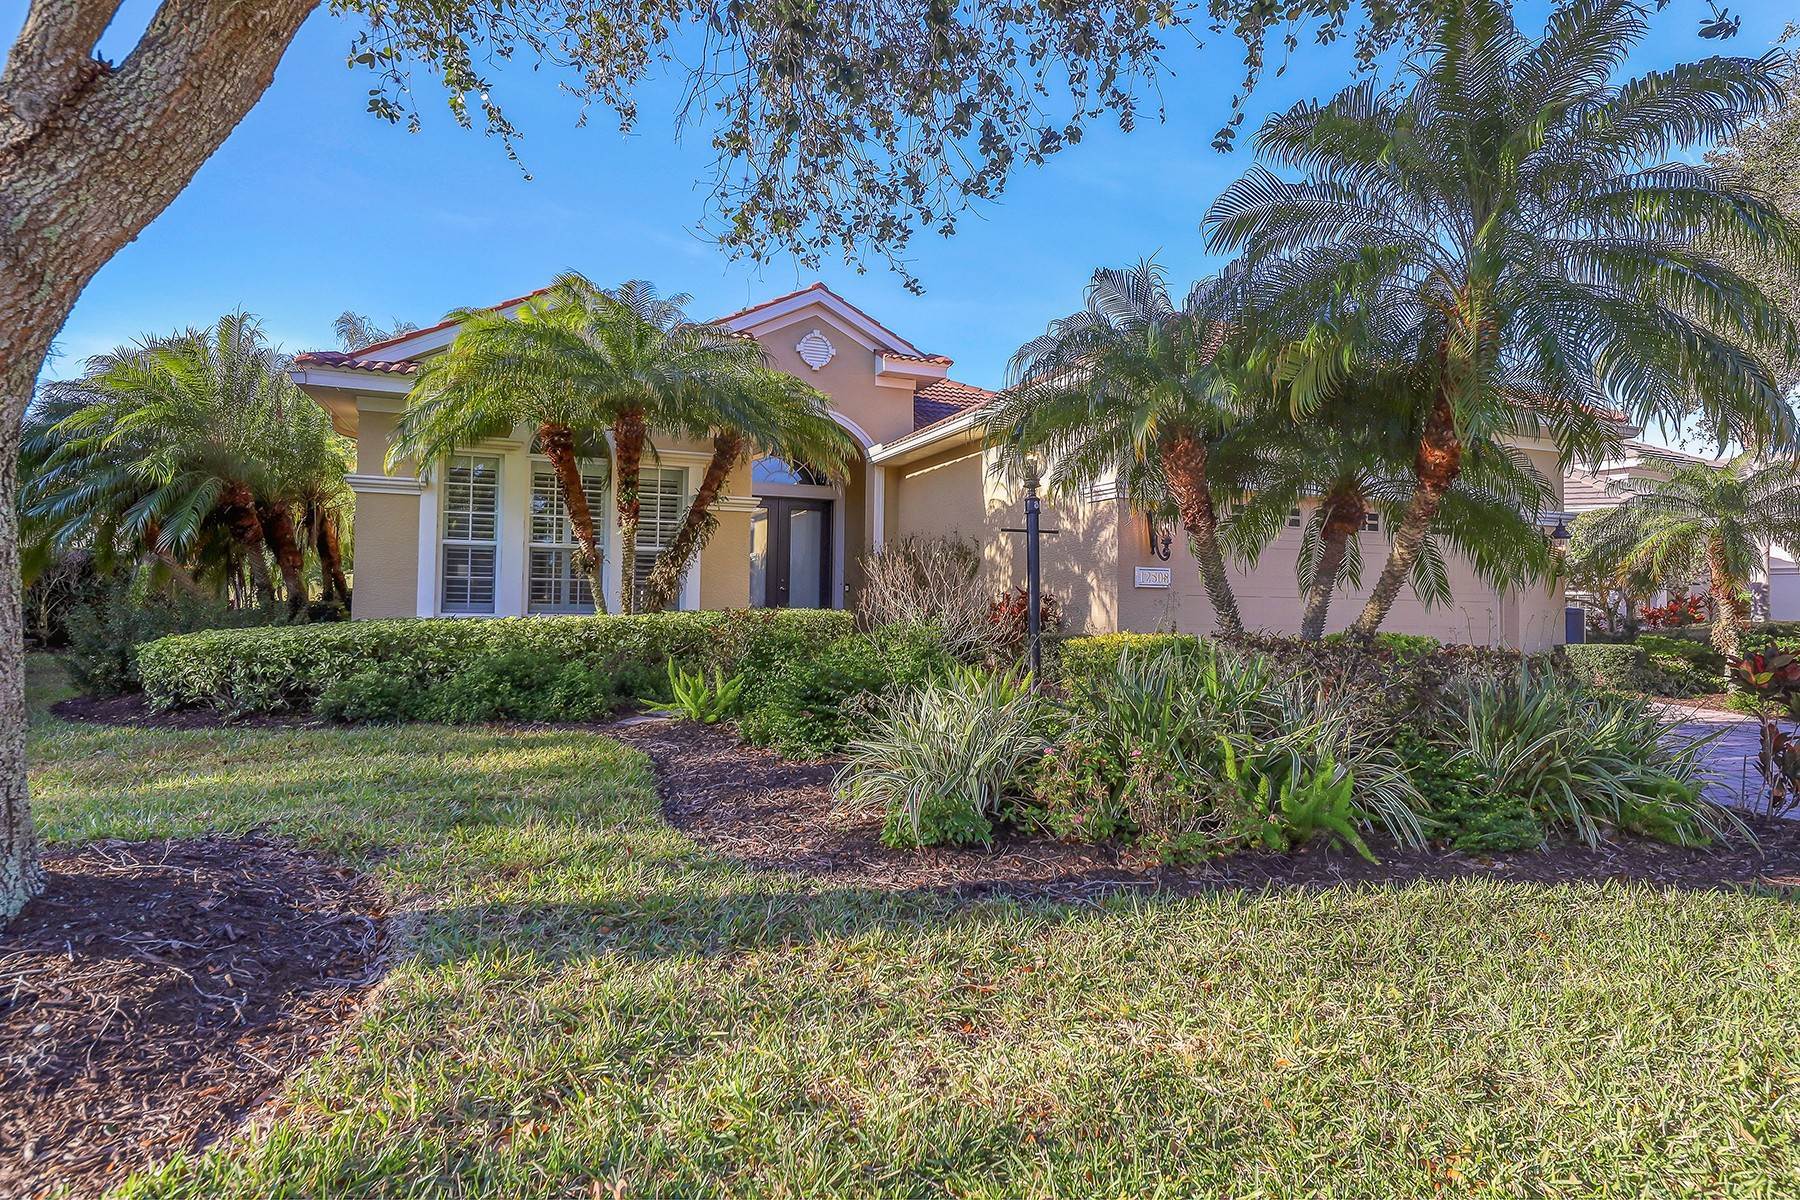 Other Residential Homes for Sale at LAKEWOOD RANCH COUNTRY CLUB 12508 Thornhill Court Lakewood Ranch, Florida 34202 United States